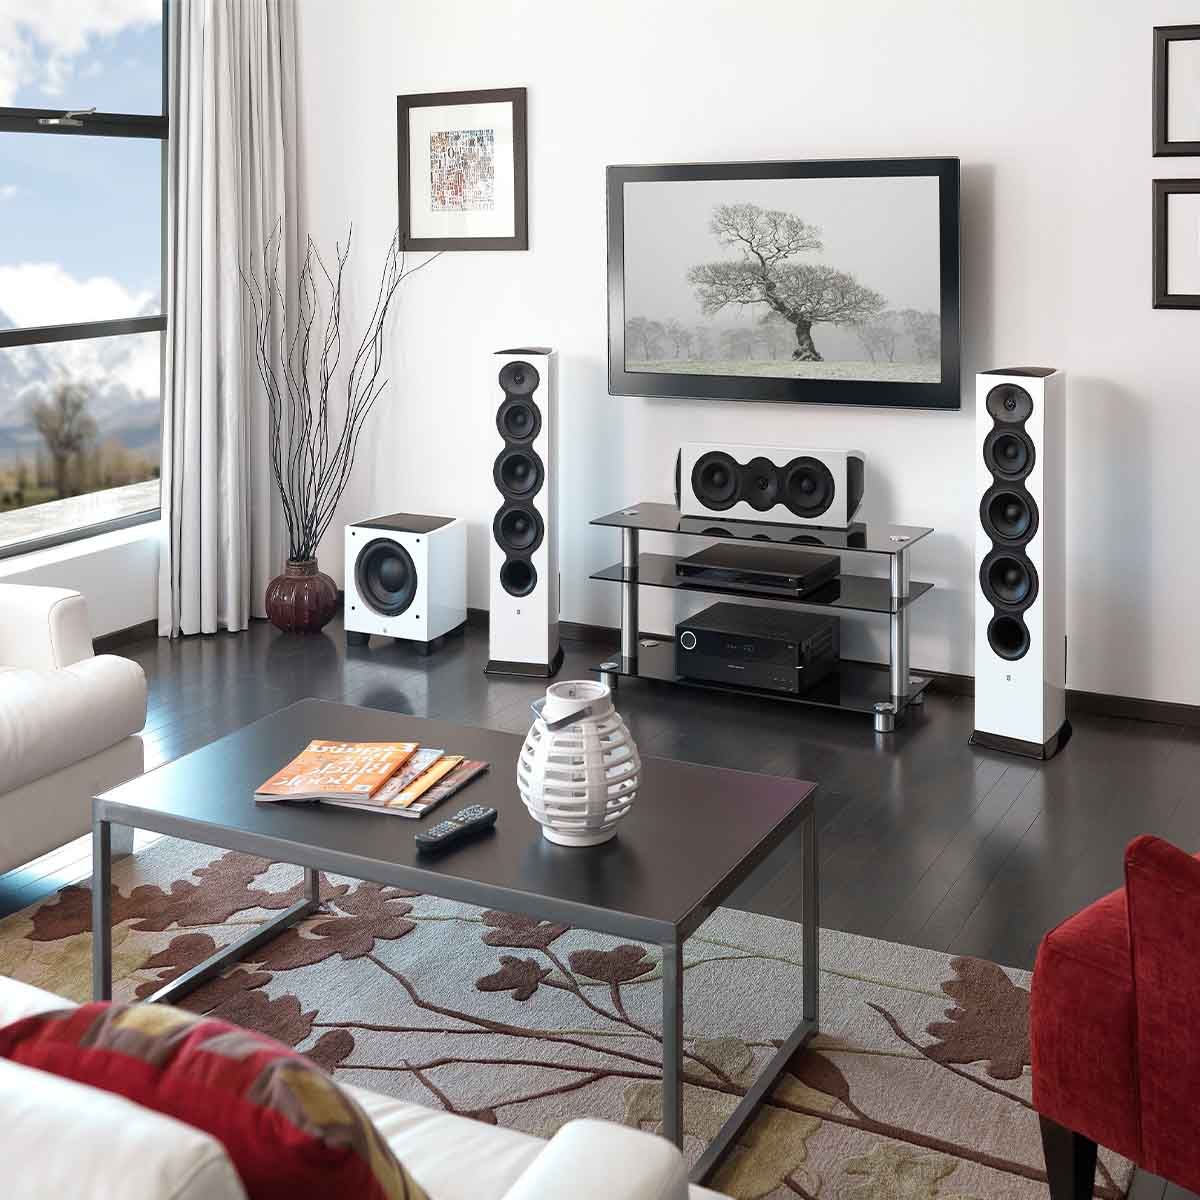 Revel F206 3-Way Floorstanding Tower Loudspeaker - White pair without grilles - lifestyle image (other devices sold separately)